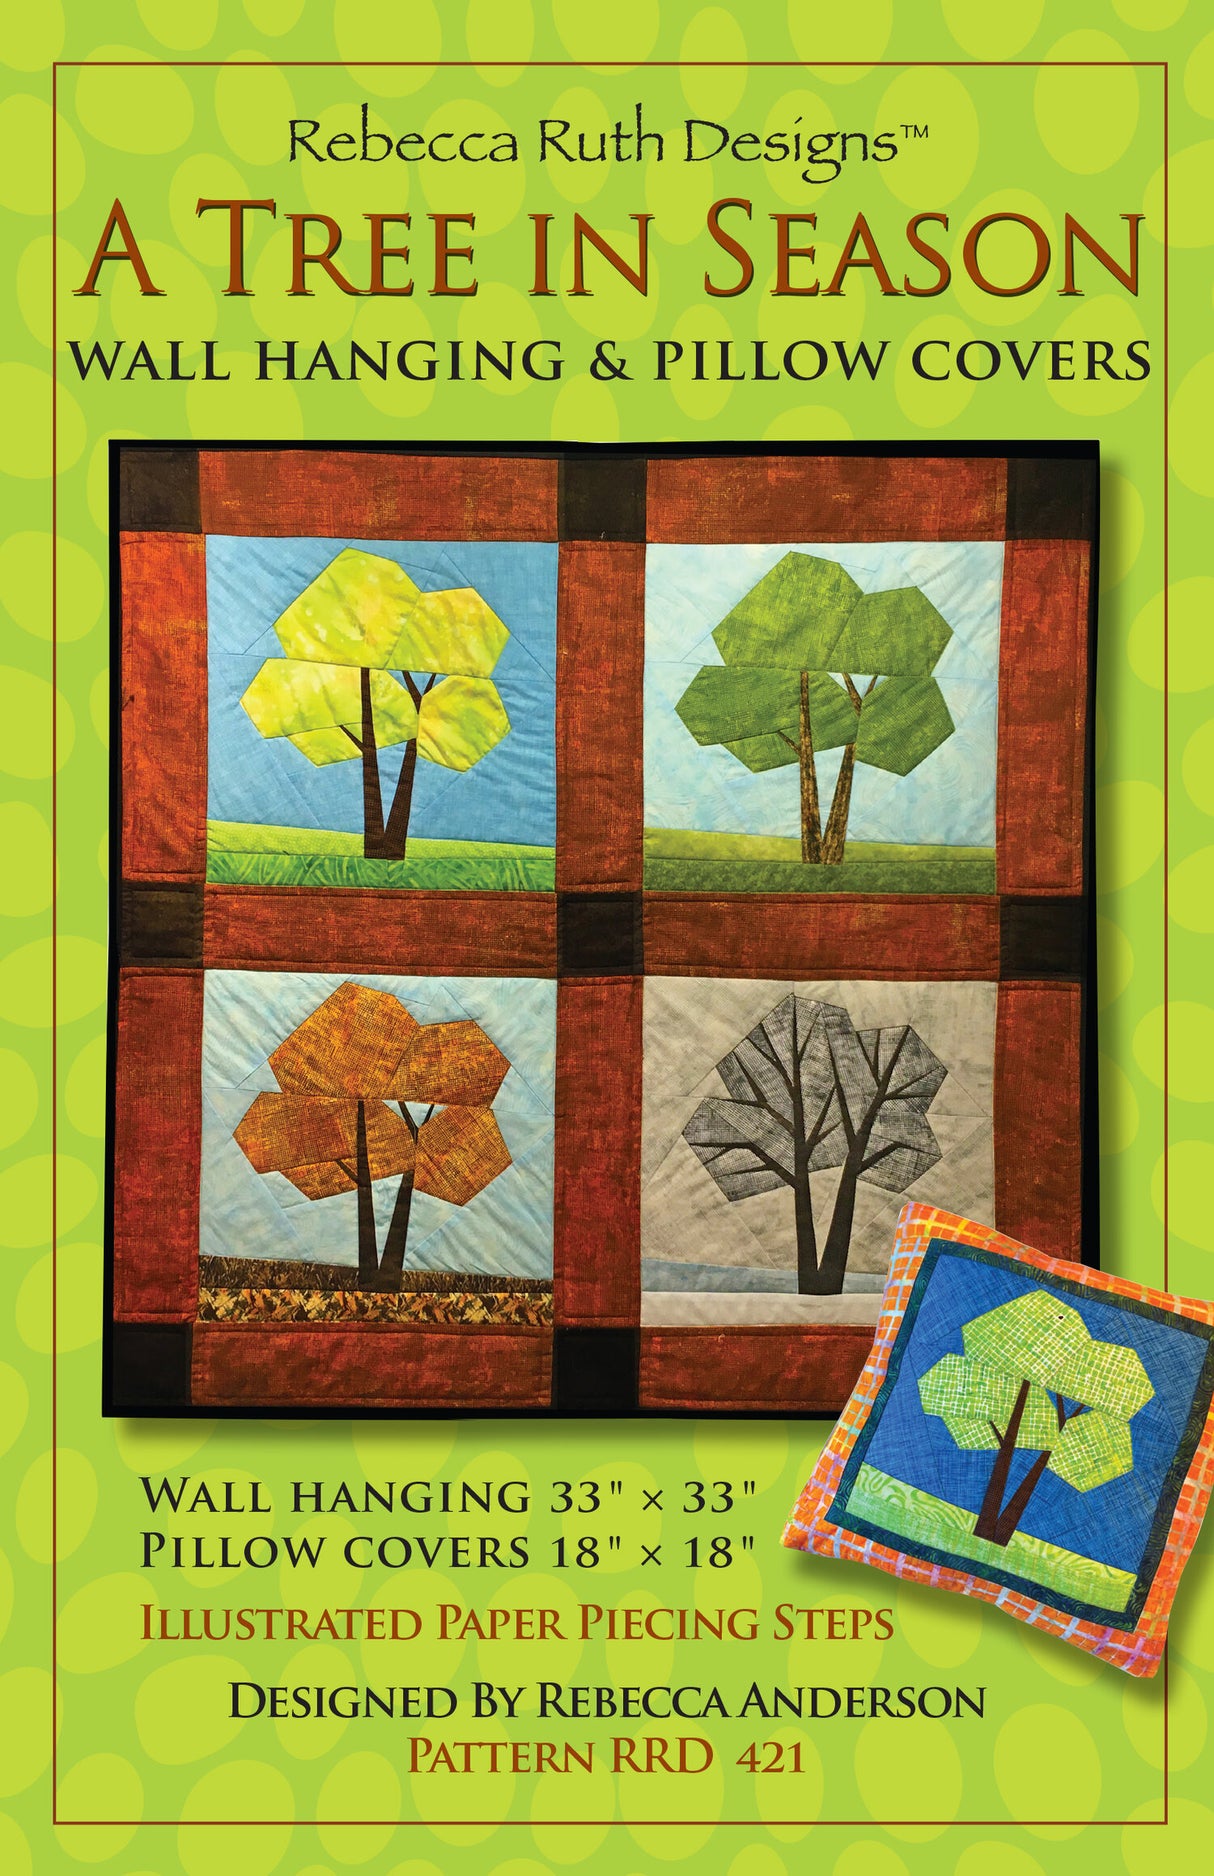 "A Tree in Season" Wall Hanging and Pillow Covers Pattern by Rebecca Ruth Designs